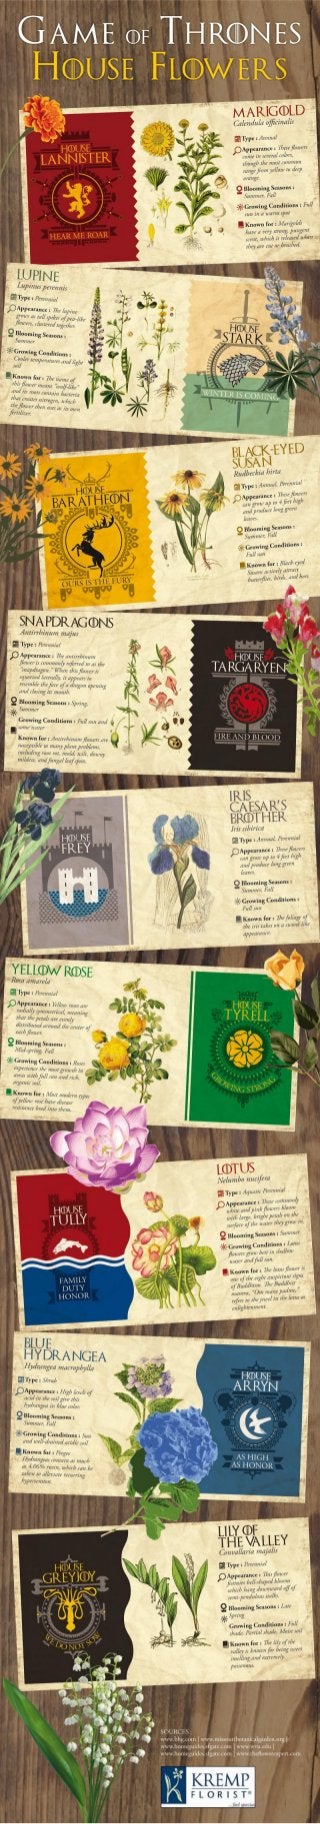 Game Of Thrones House Flowers Infographic